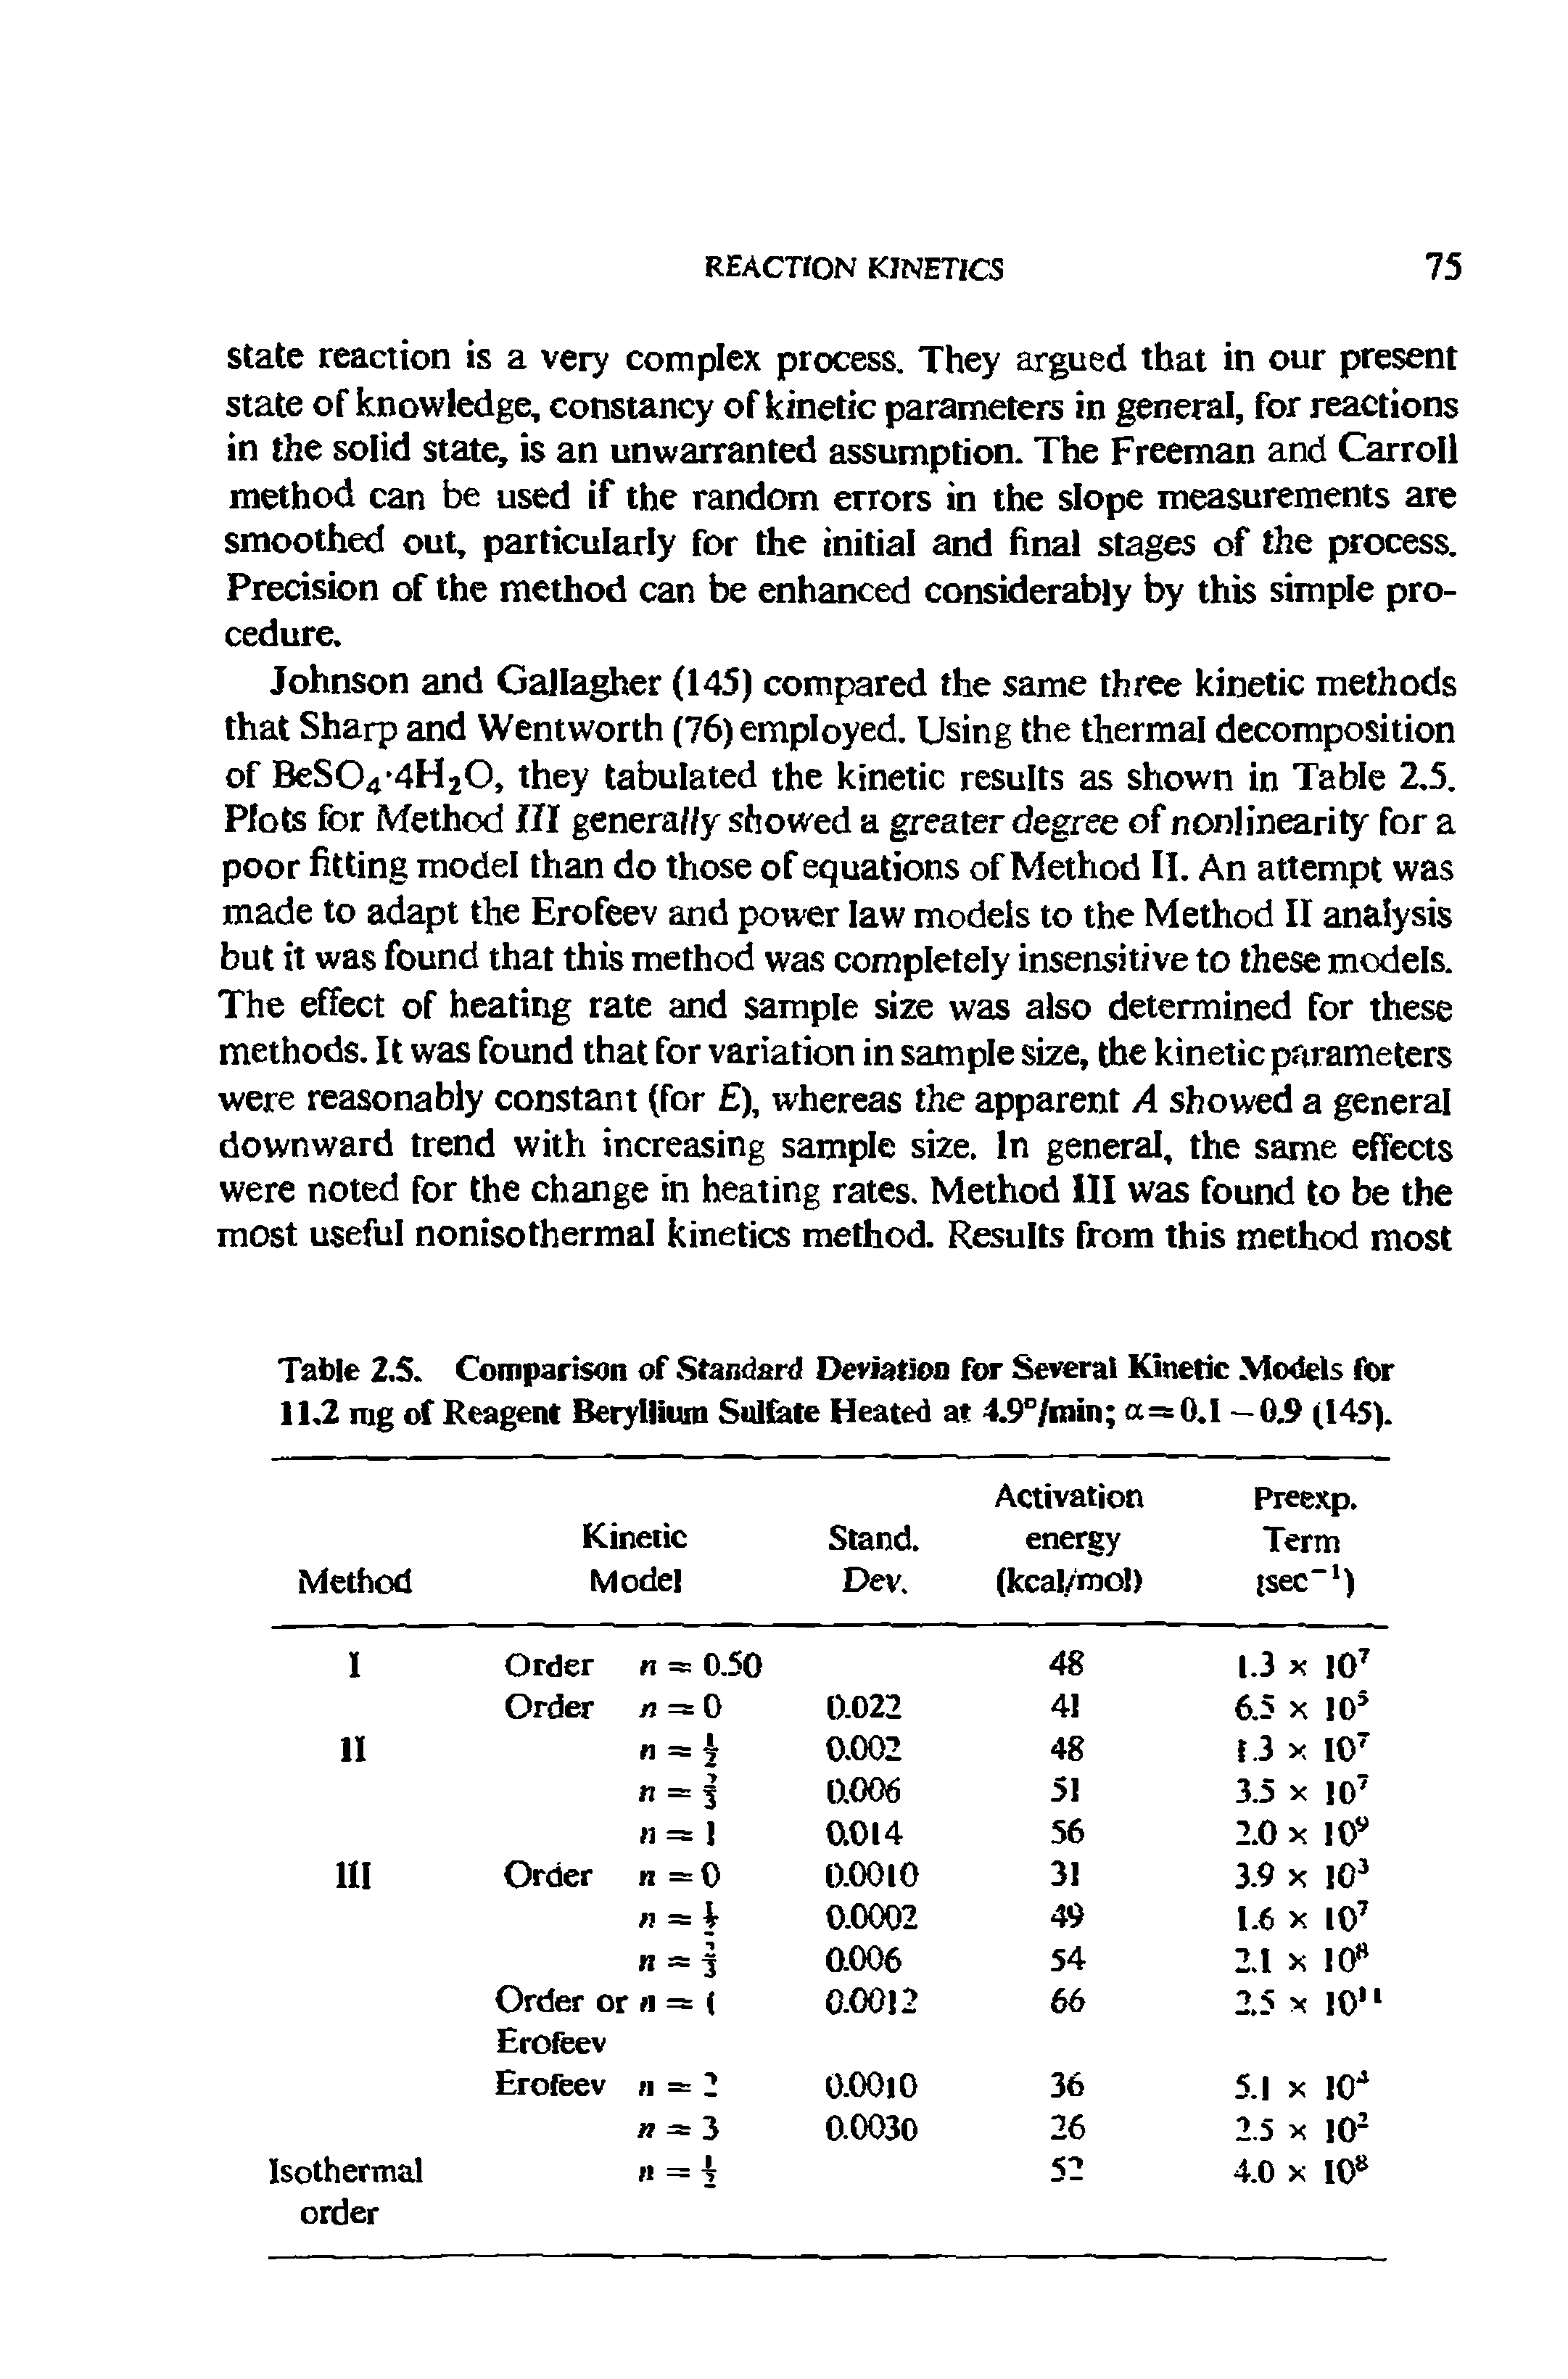 Table 2.5. Comparison of Standard Deviation for Several Kinetic Models for 11.2 nig of Reagent Beryllium Sulfate Heated at 4.9°/min a=0.1 —0.9 (145).